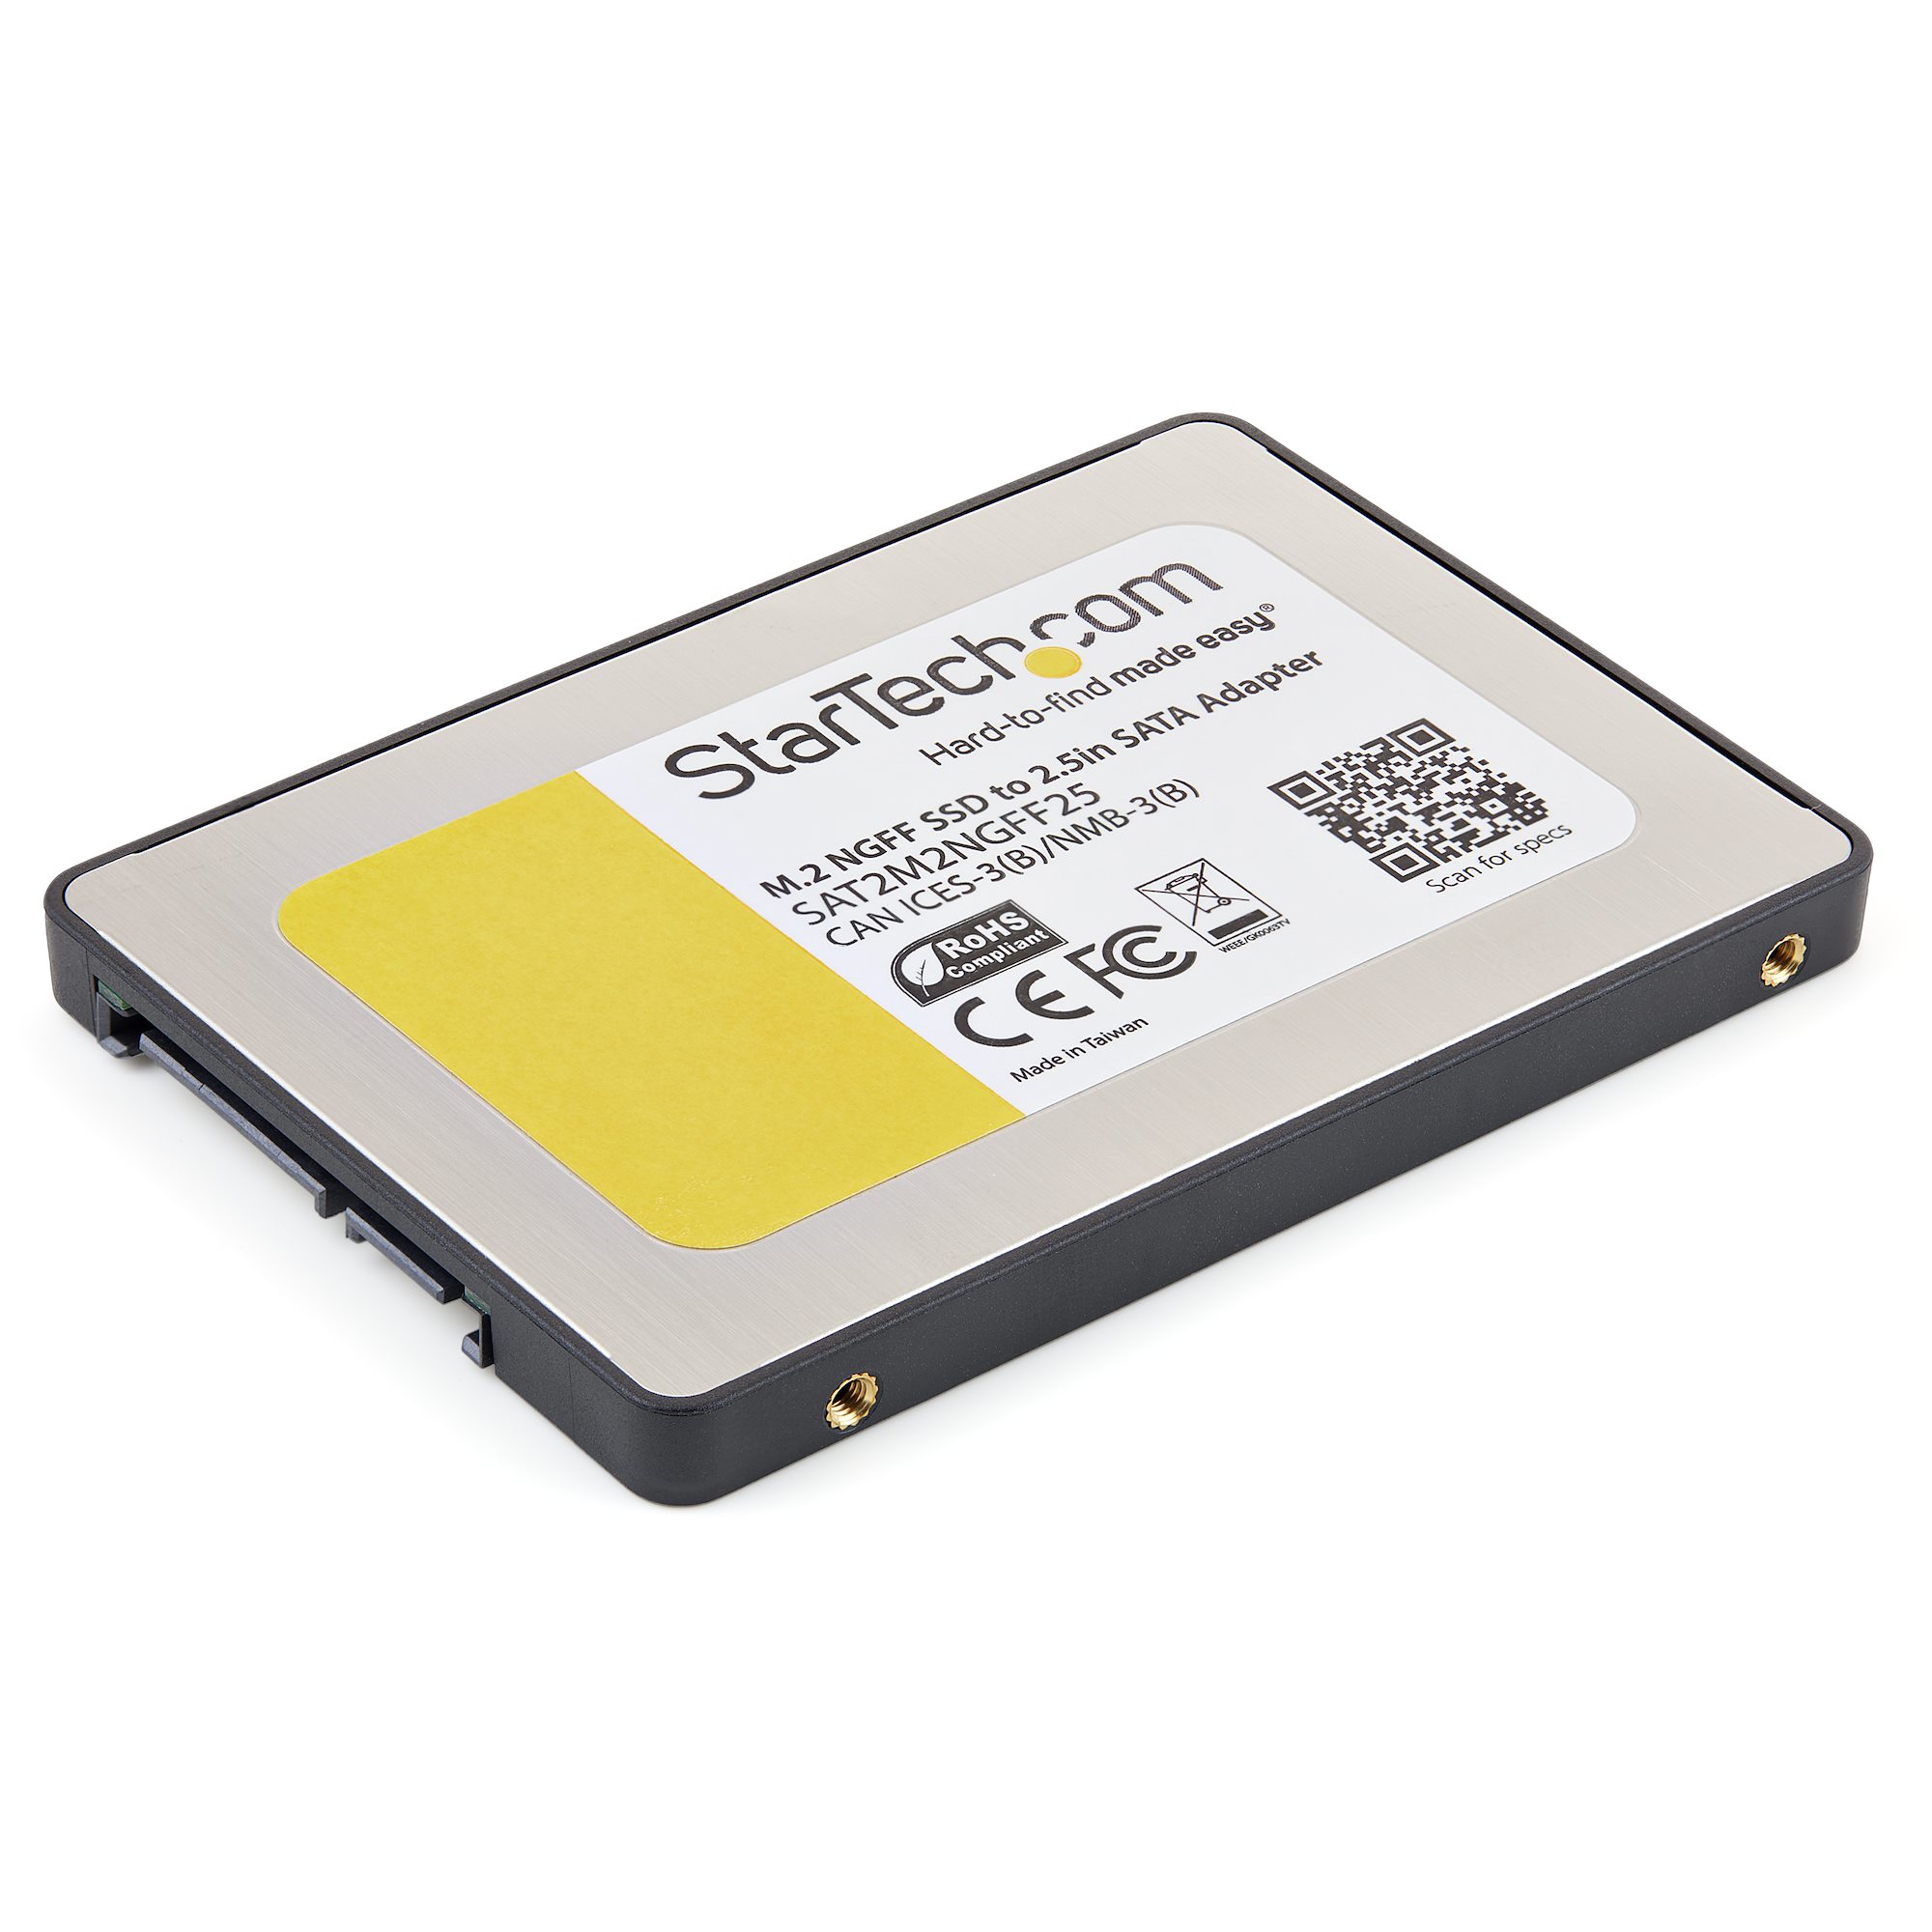 Say Throat look for Adapter - M.2 SSD to 2.5in SATA III - Drive Adapters and Drive Converters |  StarTech.com